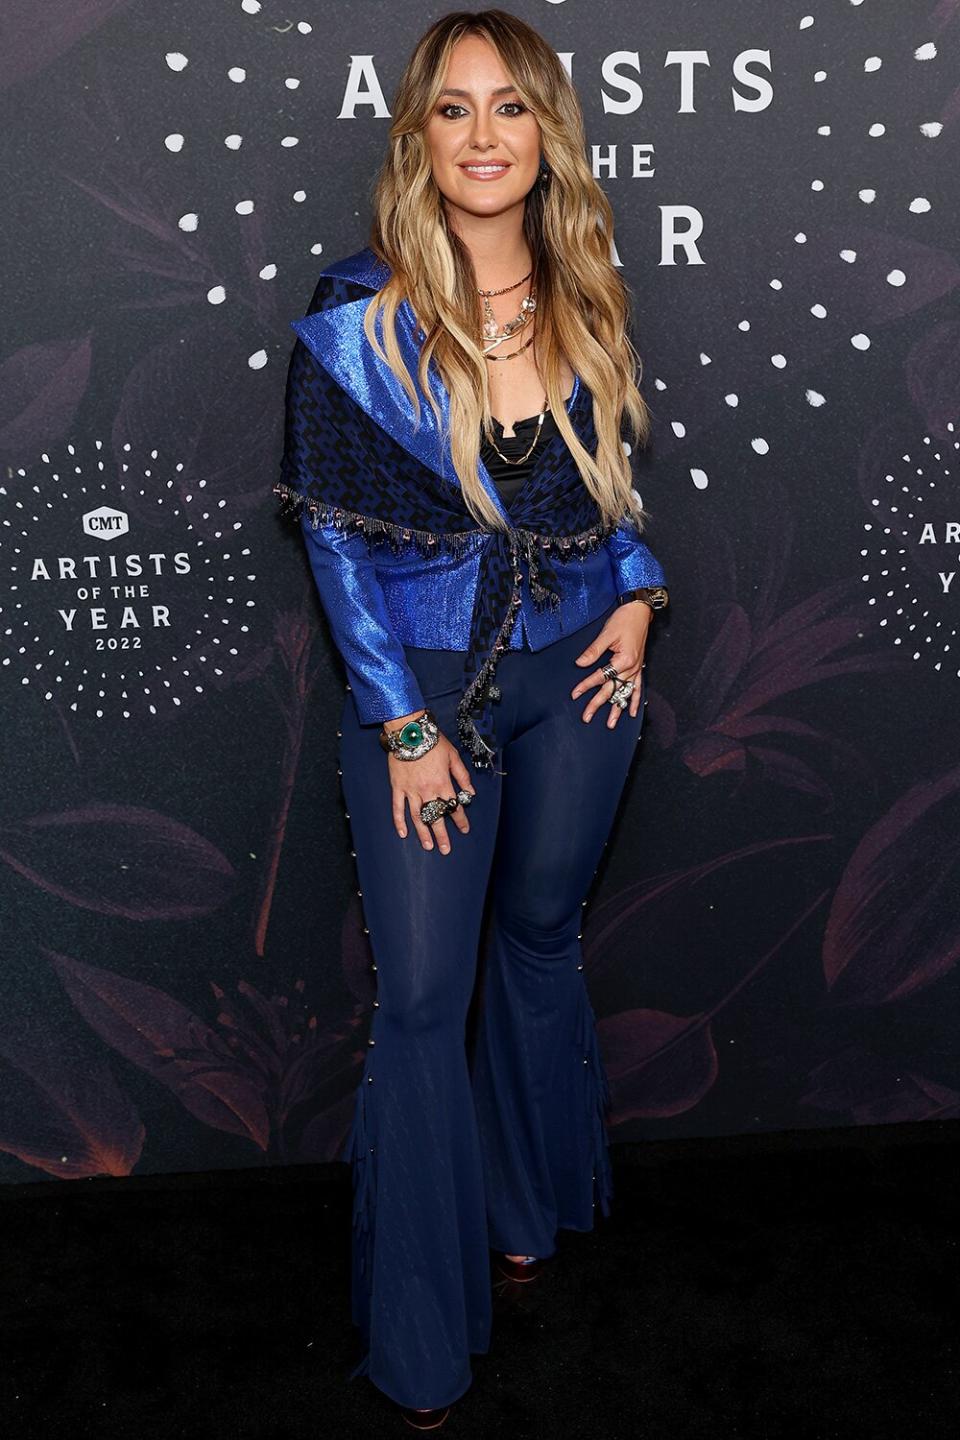 Lainey Wilson attends the 2022 CMT Artists Of The Year at Schermerhorn Symphony Center on October 12, 2022 in Nashville, Tennessee.